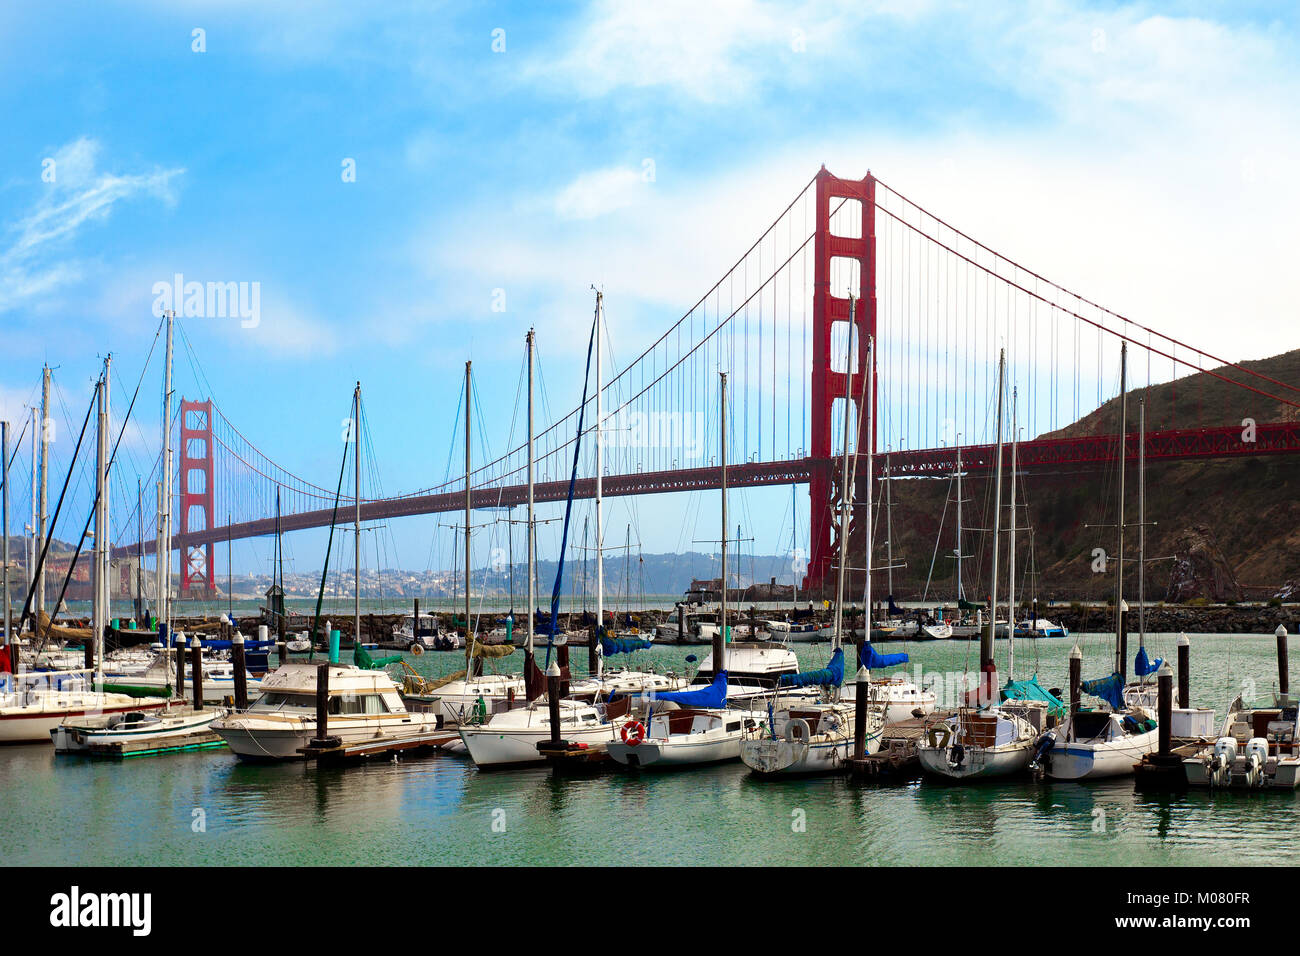 Golden Gate Bridge and the Presidio Yacht Harbor. San Francisco is seen in the background. Stock Photo